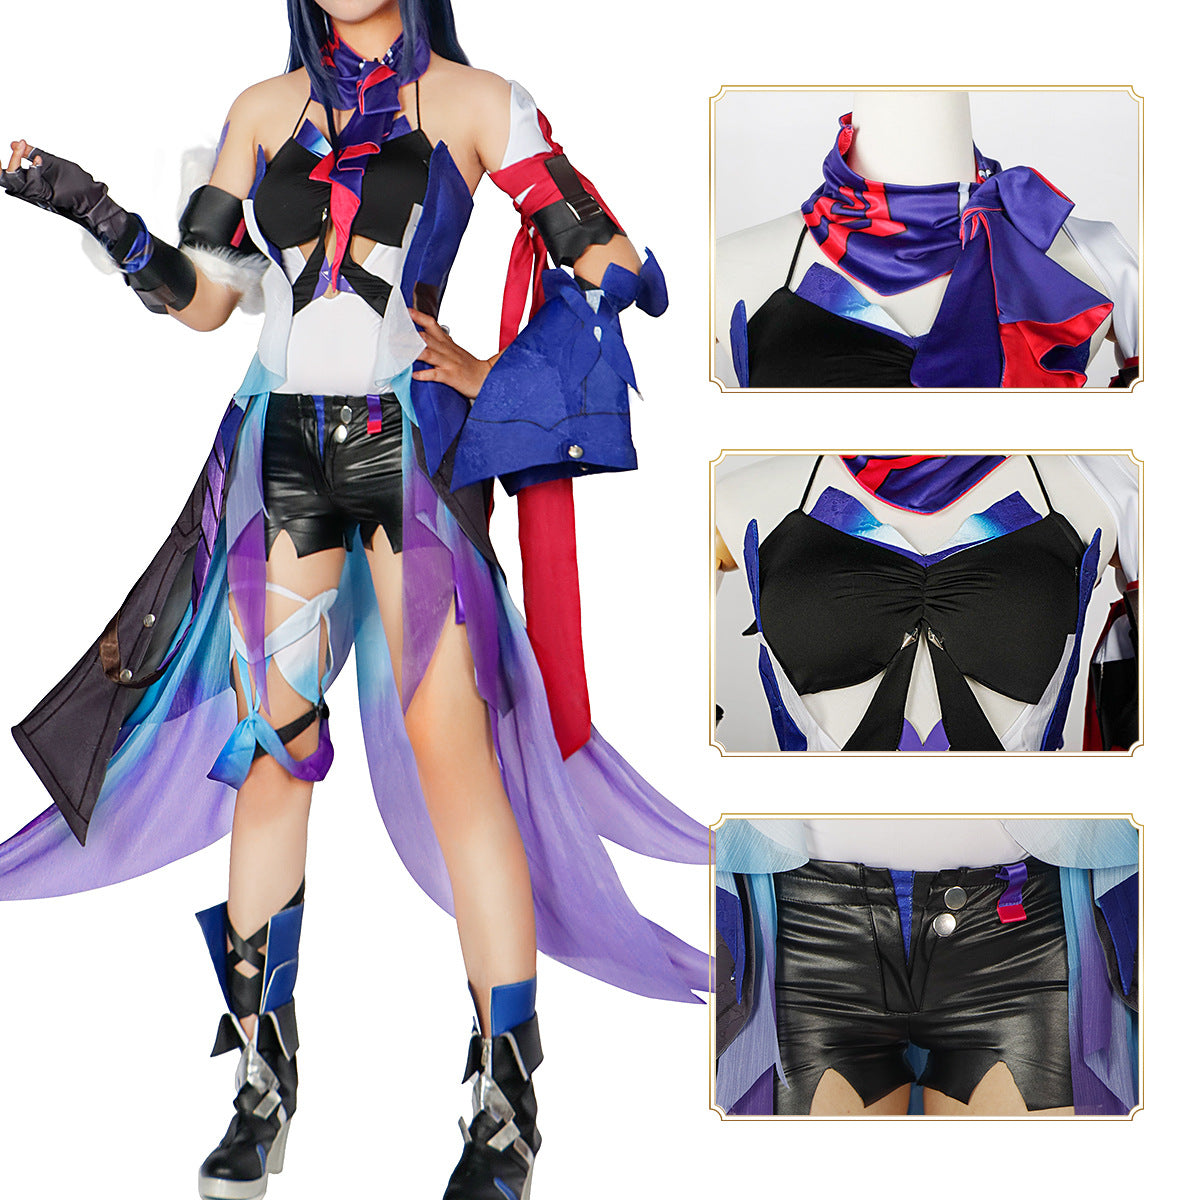 Rulercosplay Honkai Star Rail Seele Uniform Suit Cosplay Costume With Accessories For Halloween Party